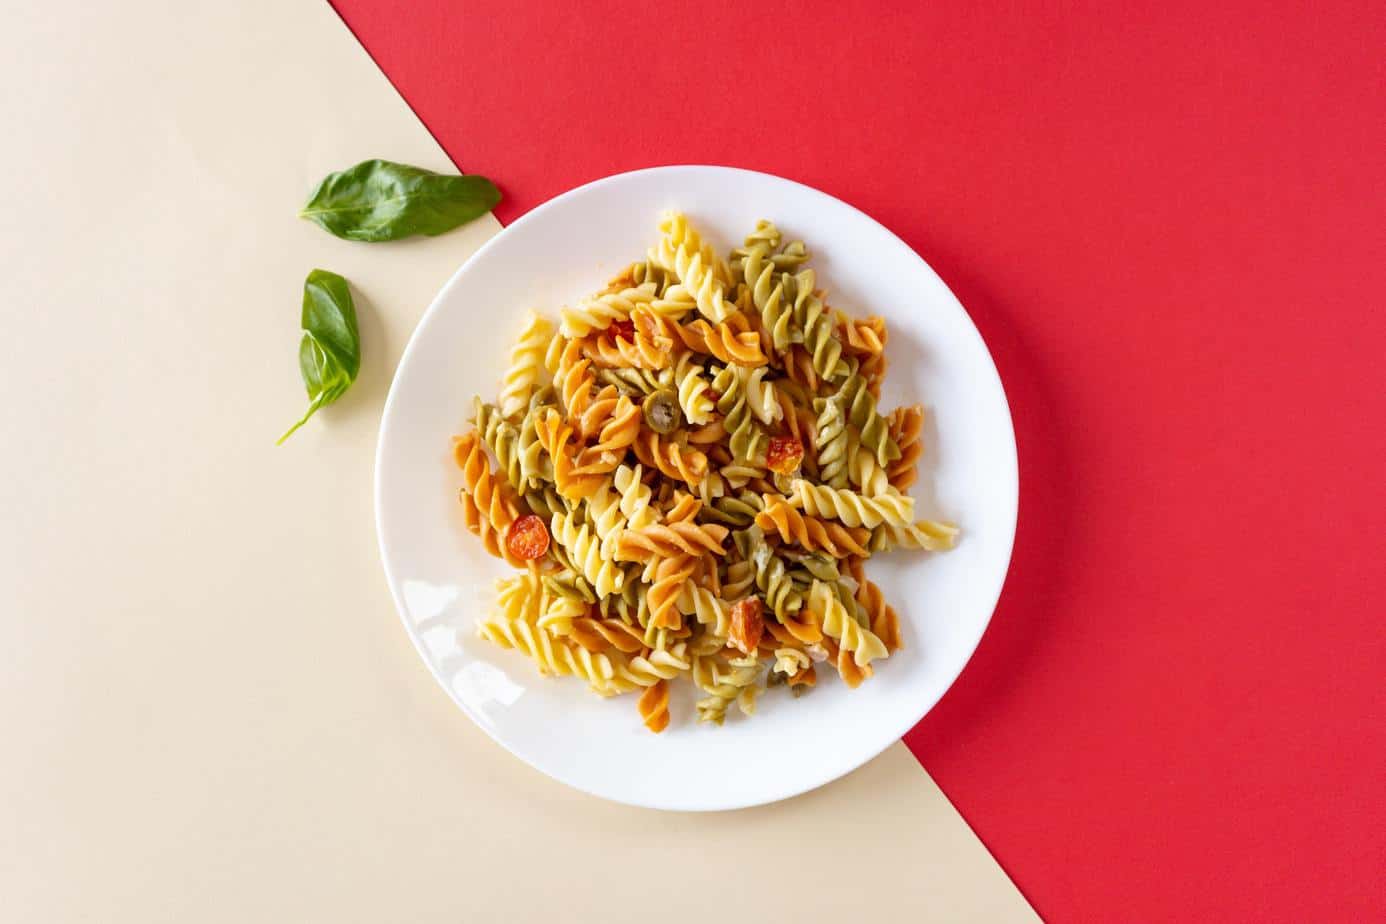 How to cook pasta? Check out what you need to remember to make it perfect!